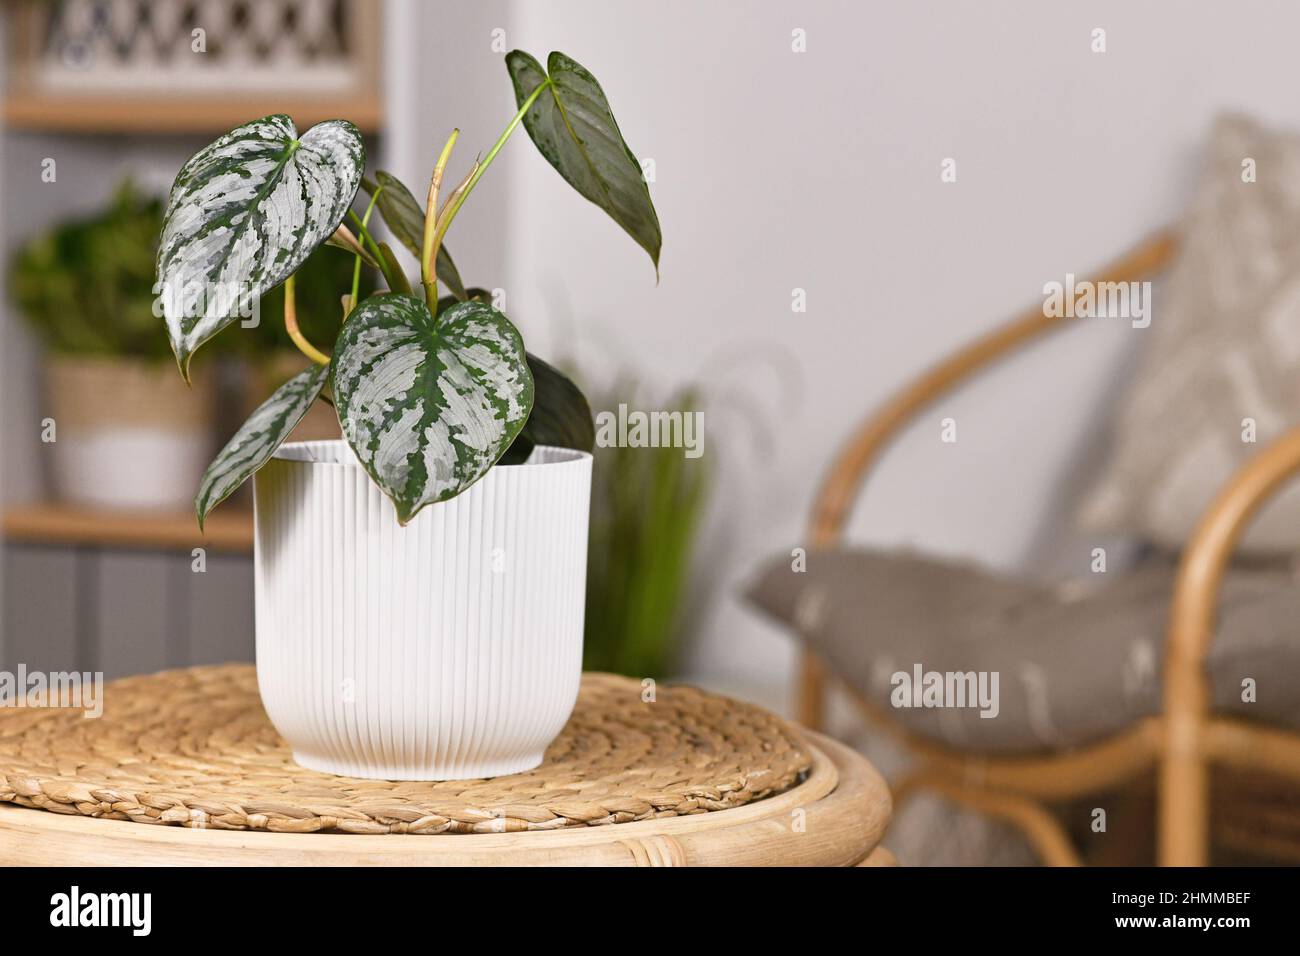 Small exotic 'Philodendron Brandtianum' houseplant with silver pattern on leaves in flower poto on table Stock Photo